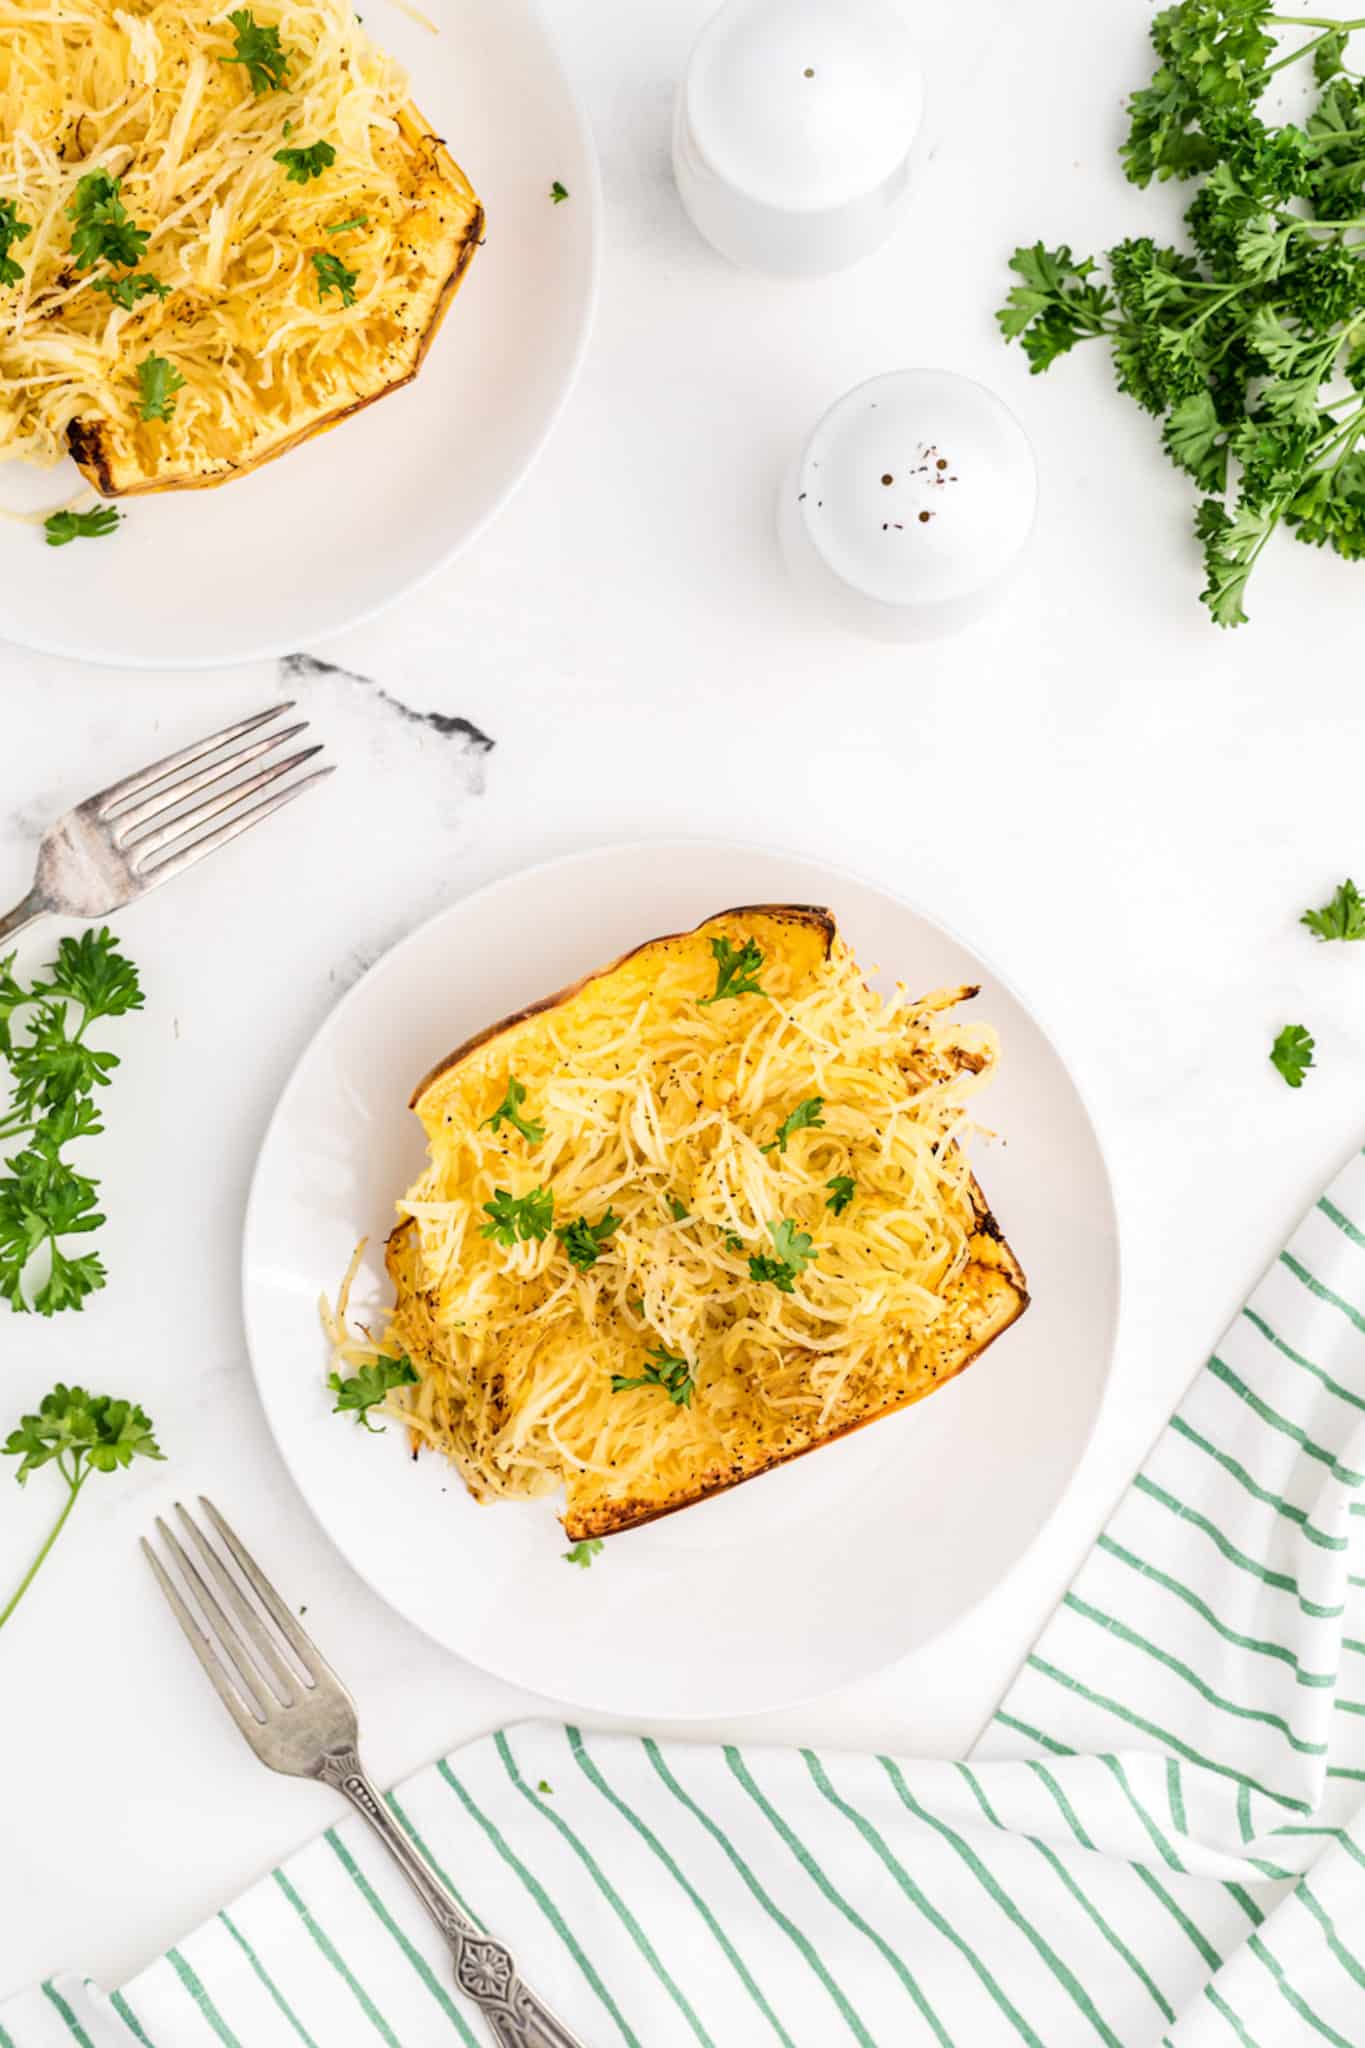 two plates of cooked spaghetti squash with parsley garnish.